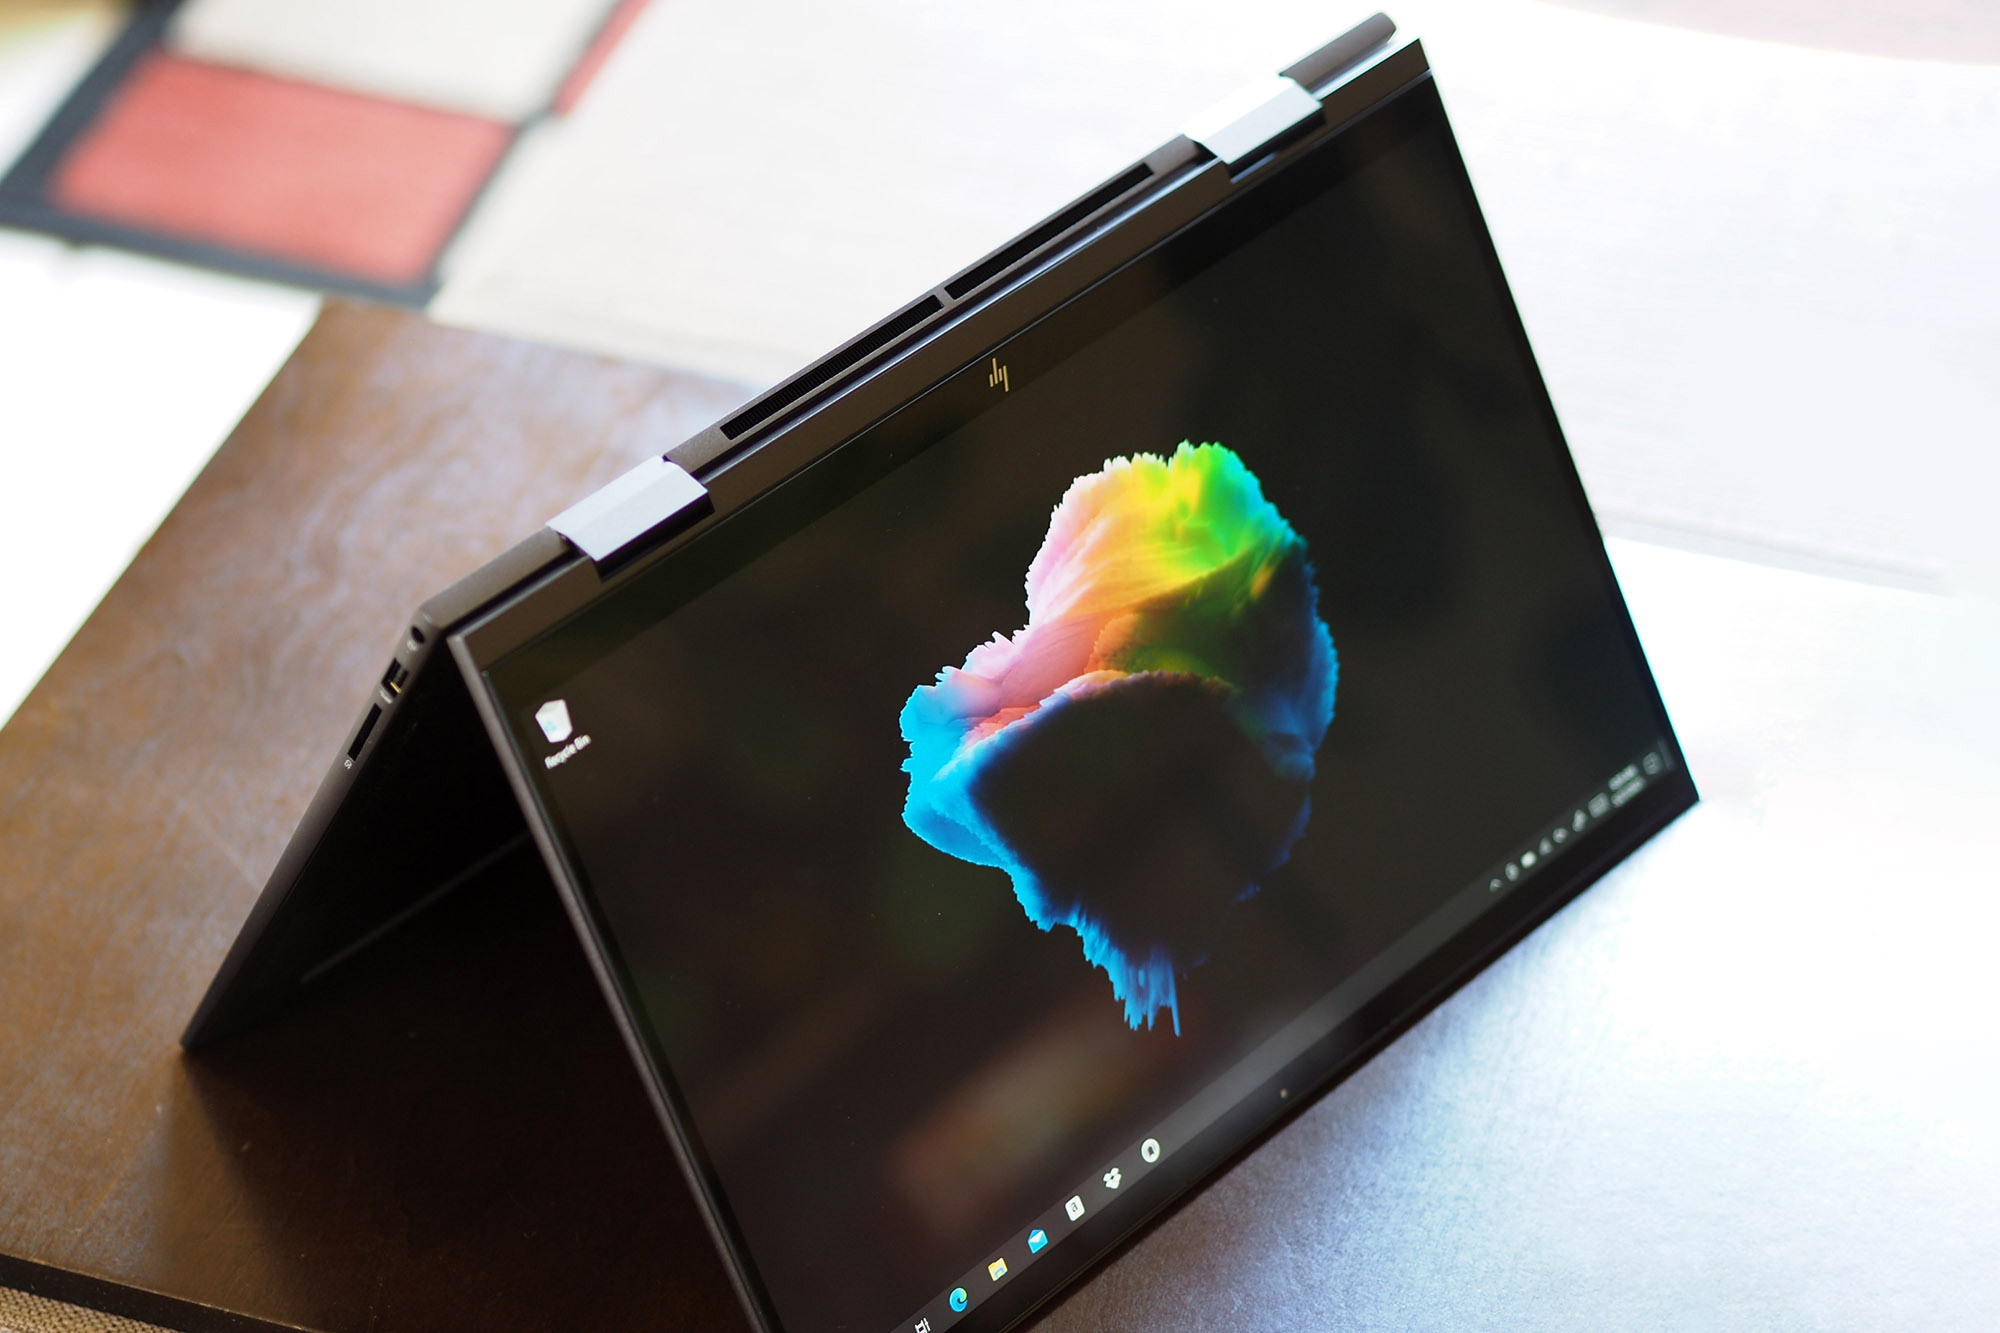 HP Envy x360 15 Review : Solid Build Quality, but Performance and